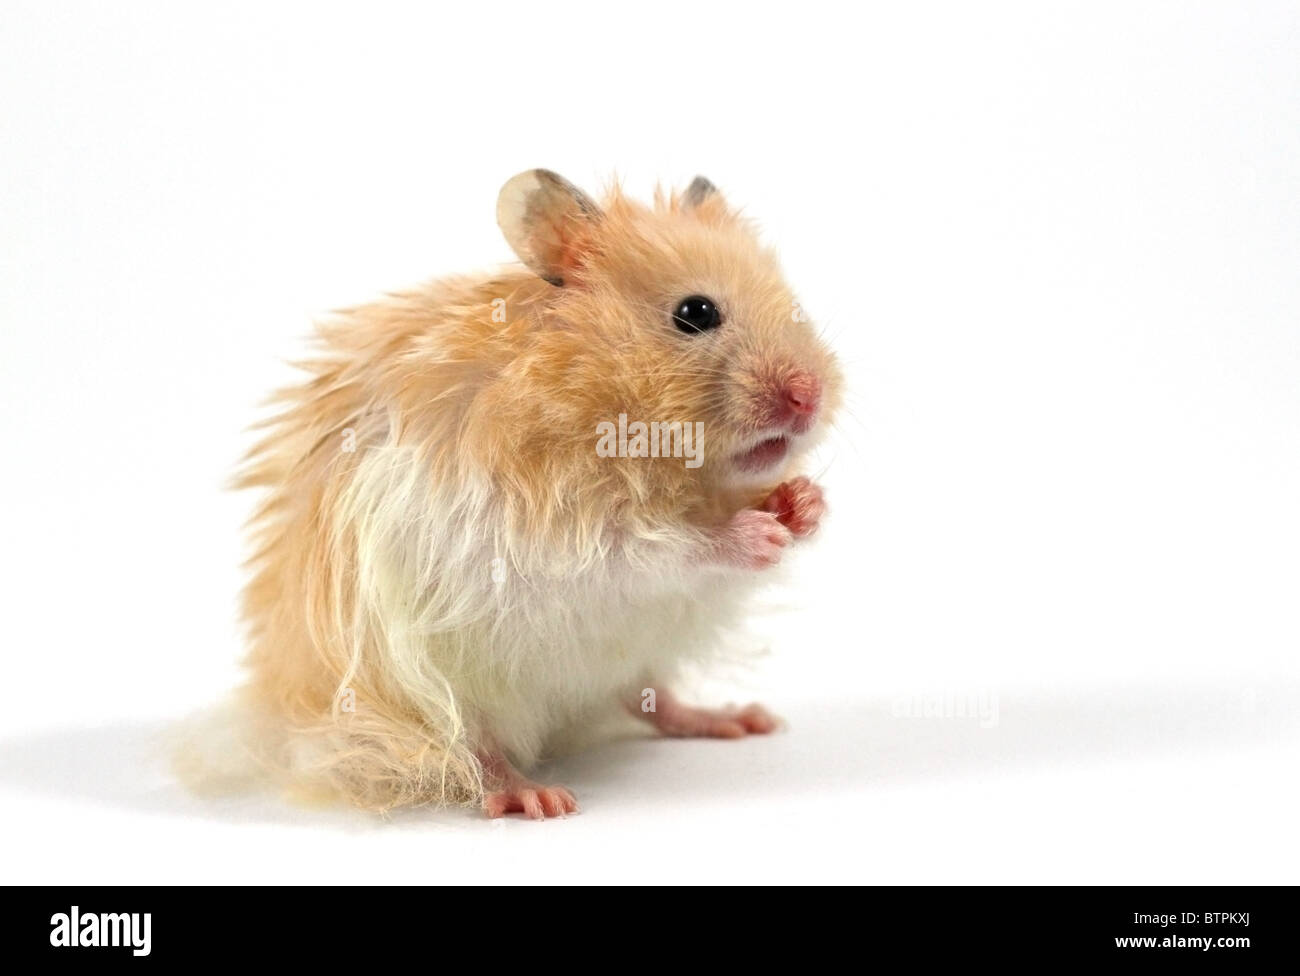 Hamster isolated on a white background Banque D'Images